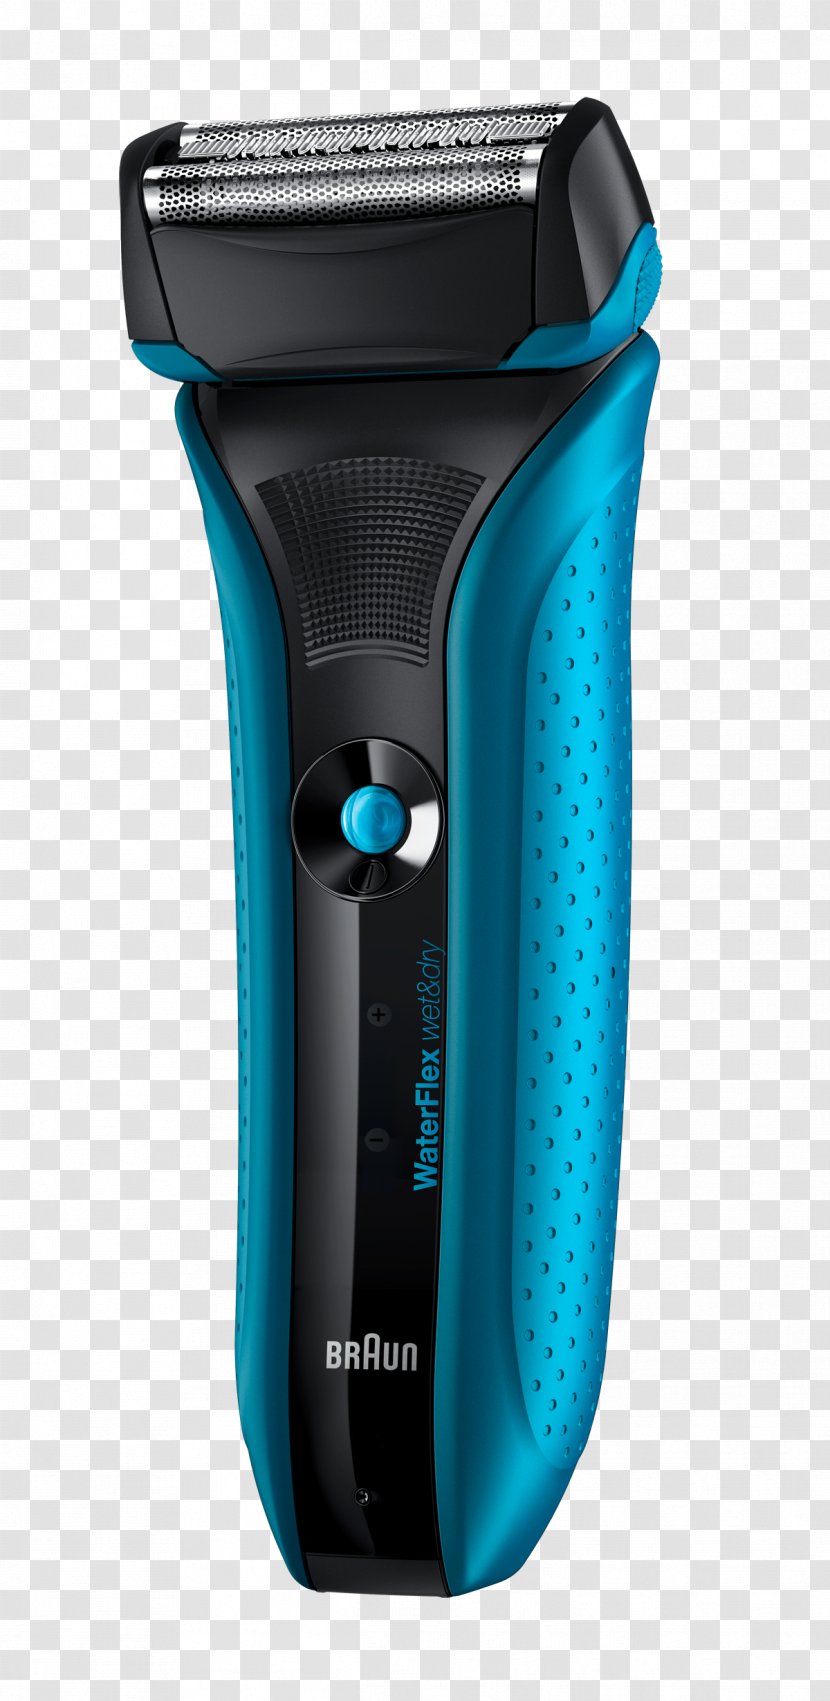 Braun Waterflex WF2s 2S Wf Blue Wet & Dry Electric Razors Hair Trimmers Shaving - Series 7 7898cc And Shaver - Congratulation Transparent PNG